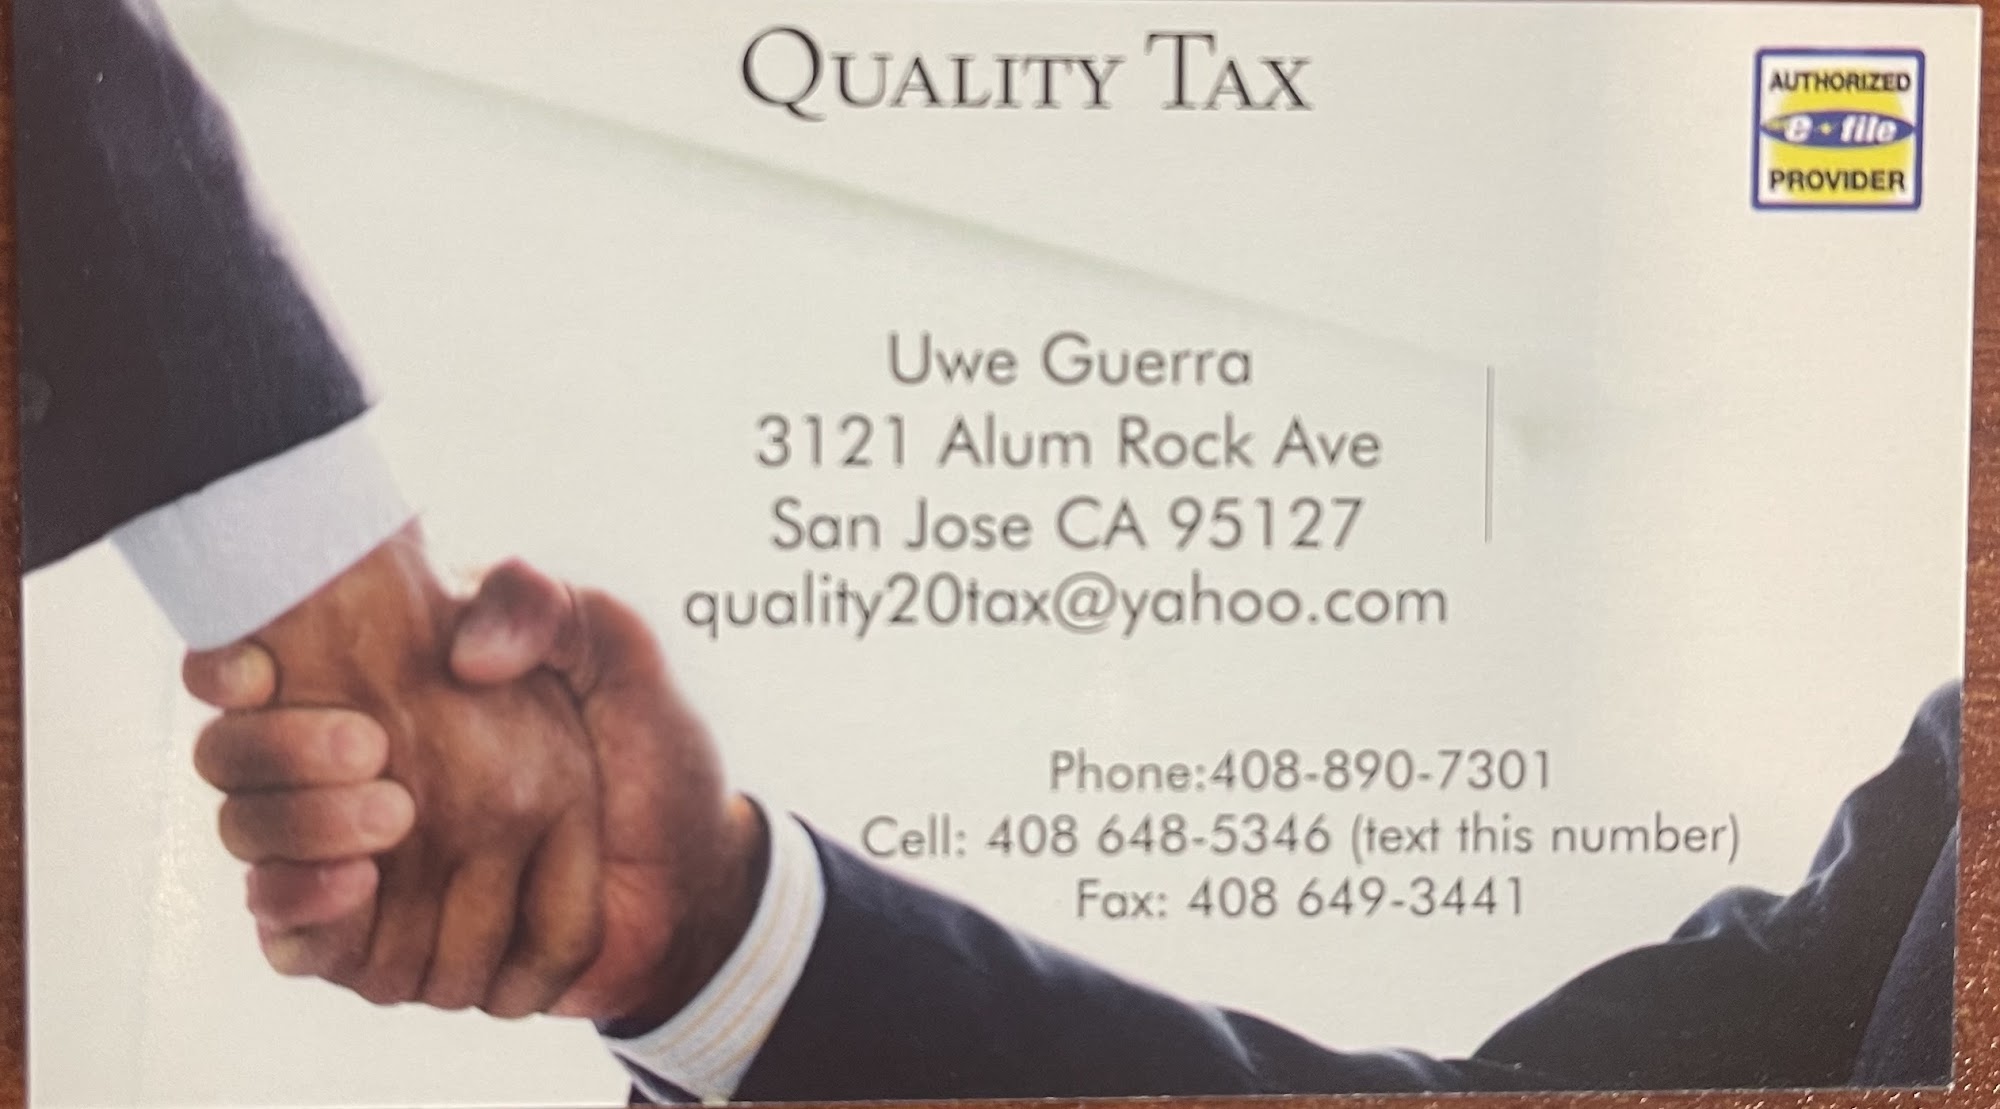 Quality Tax Services